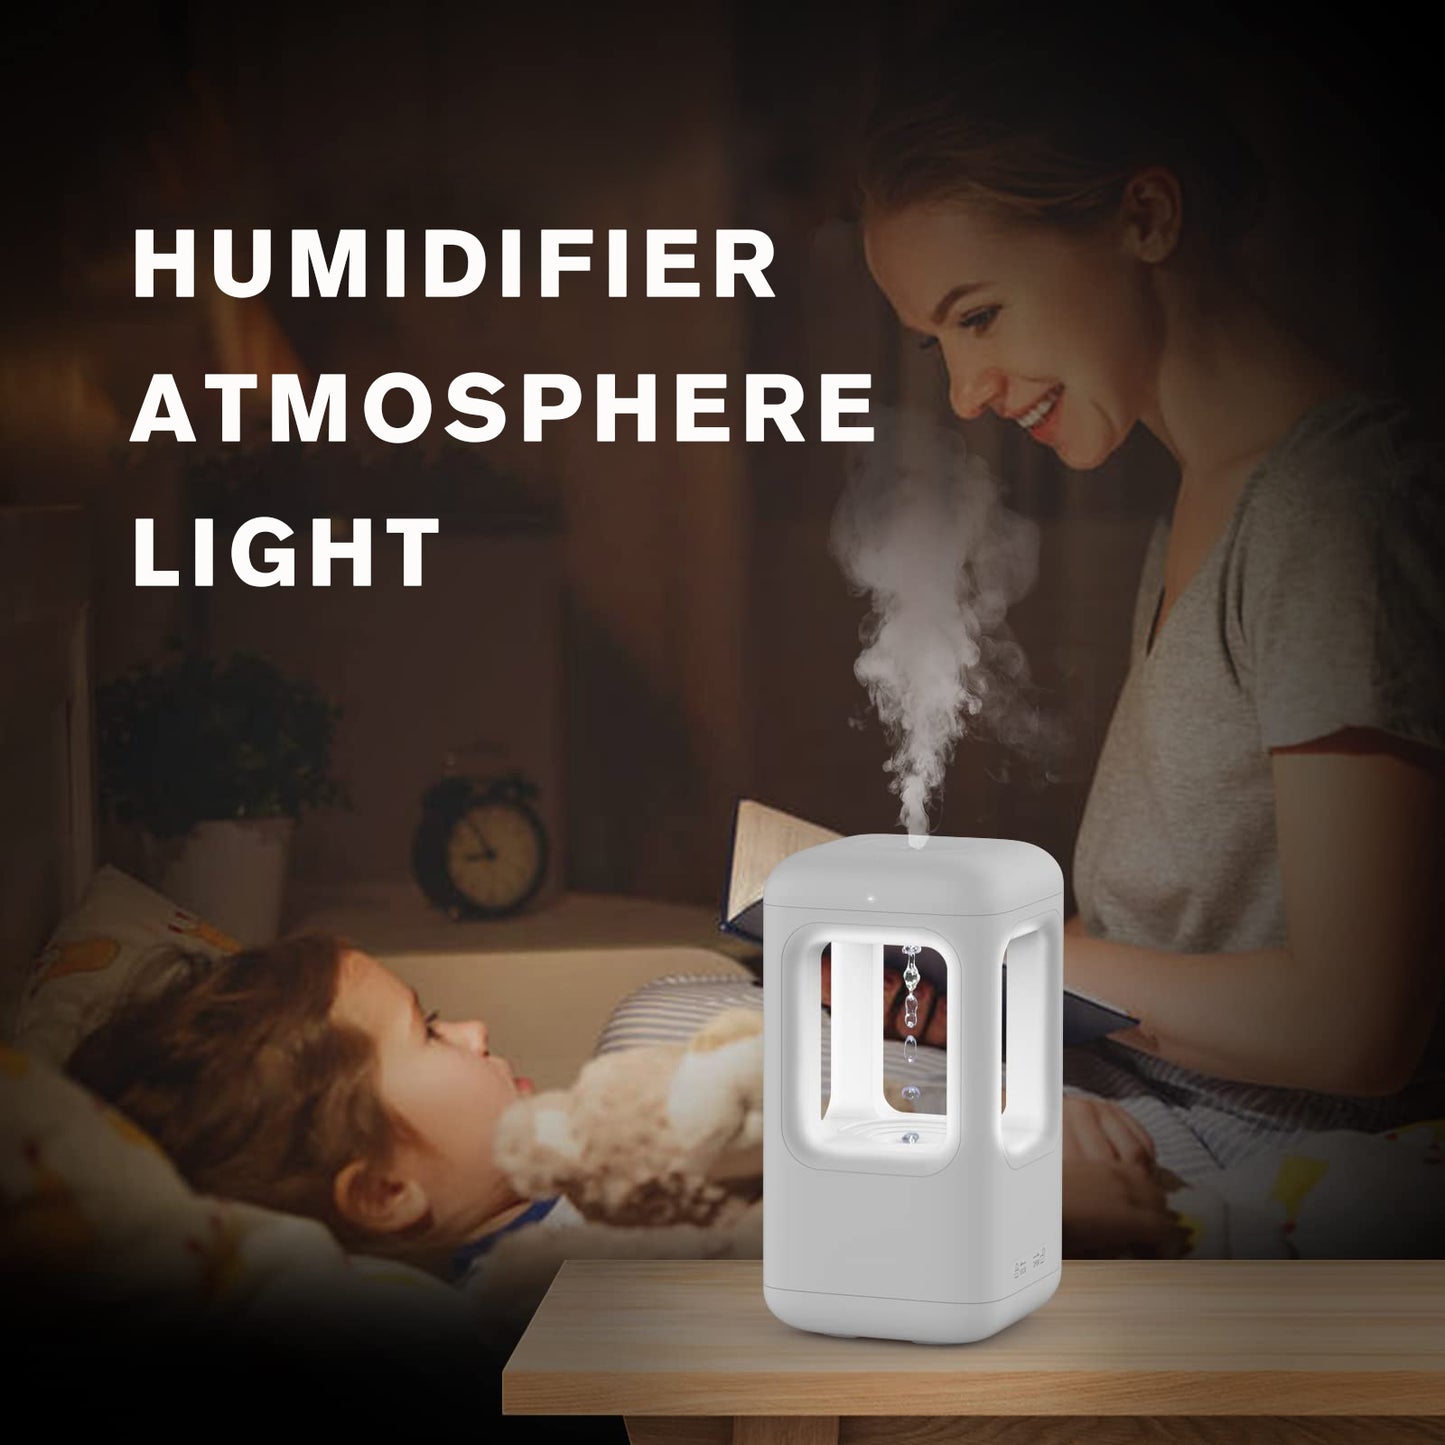 New Air Humidifier Home Quiet Bedroom Anti-Gravity Water Drop Humidifier Atmosphere Light